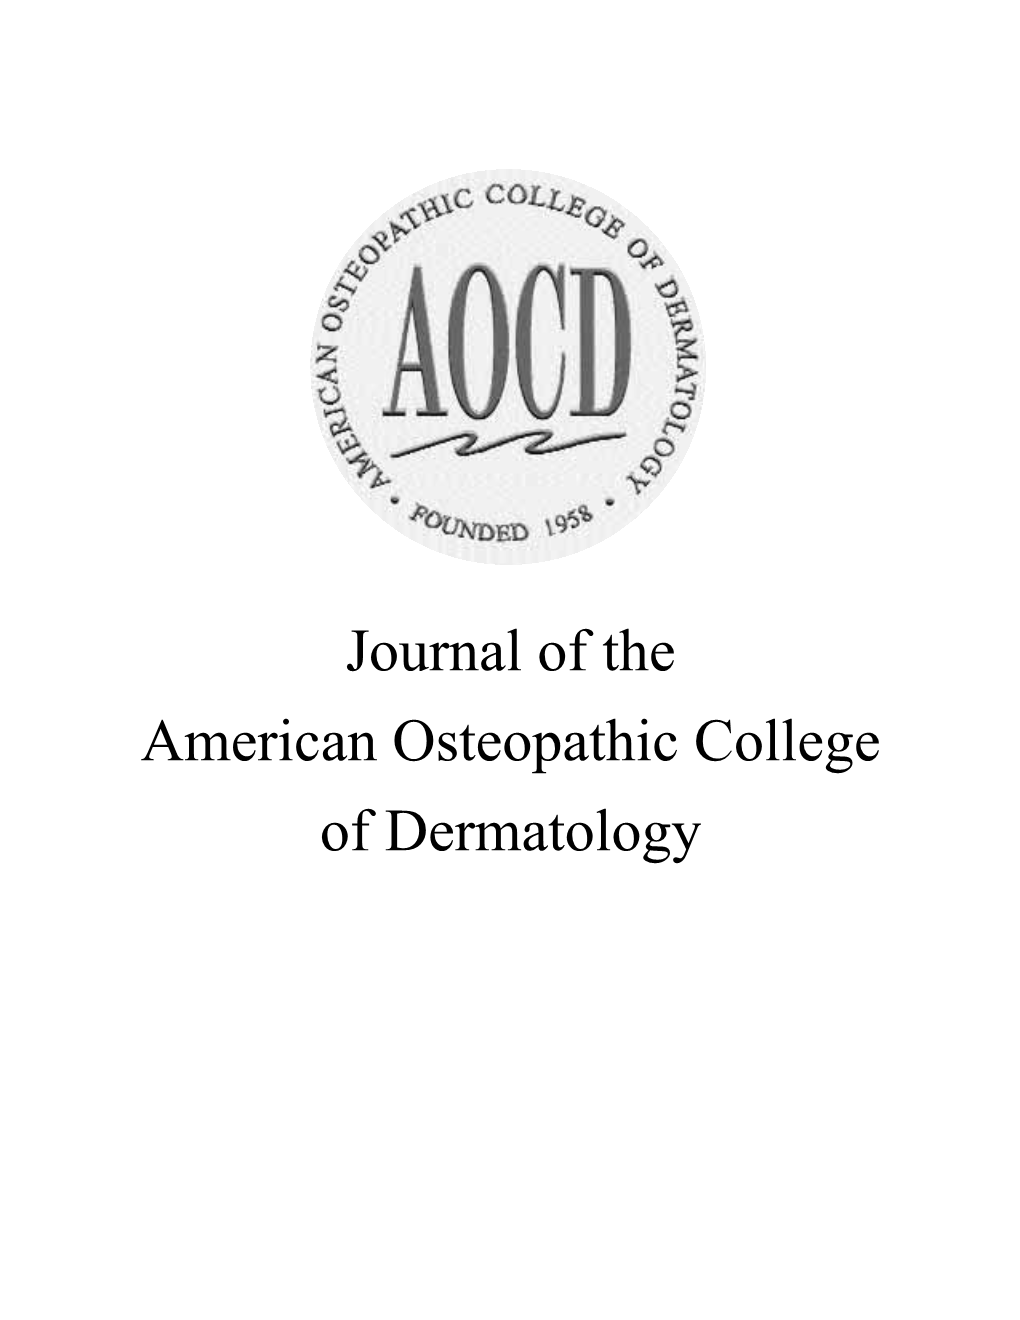 Journal of the American Osteopathic College of Dermatology Journal of the American Osteopathic College of Dermatology